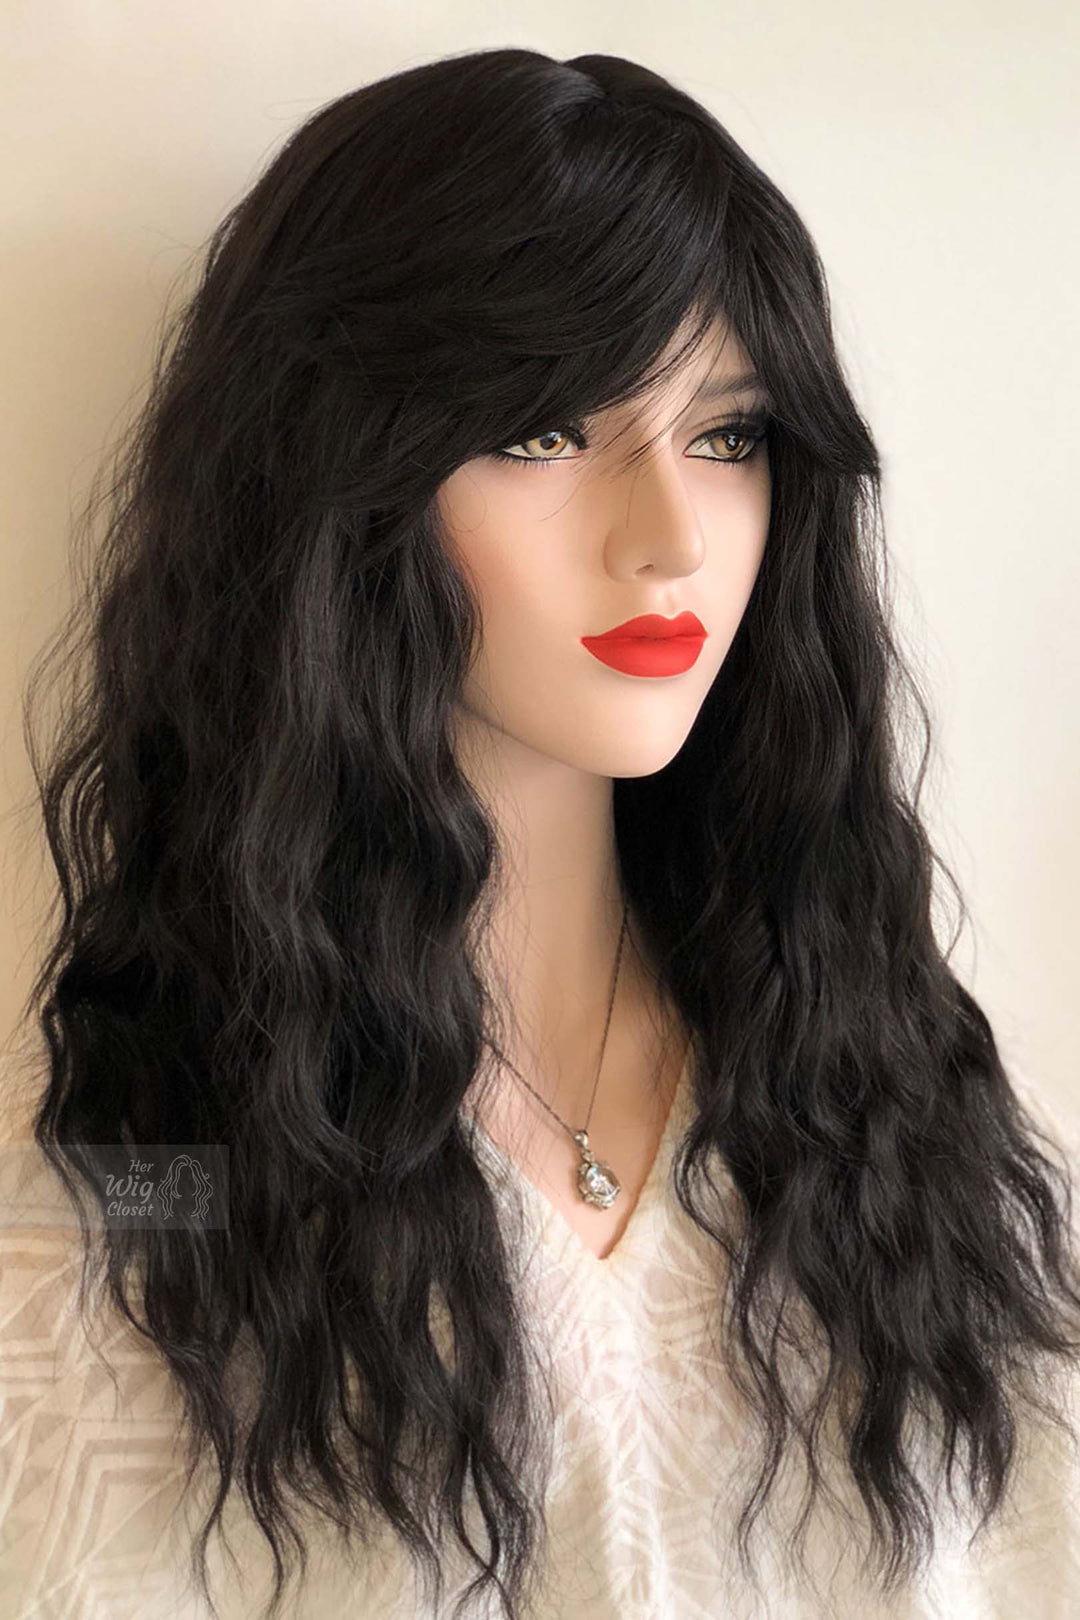 Emily | Black Loose Wave Wig with Bangs 20"